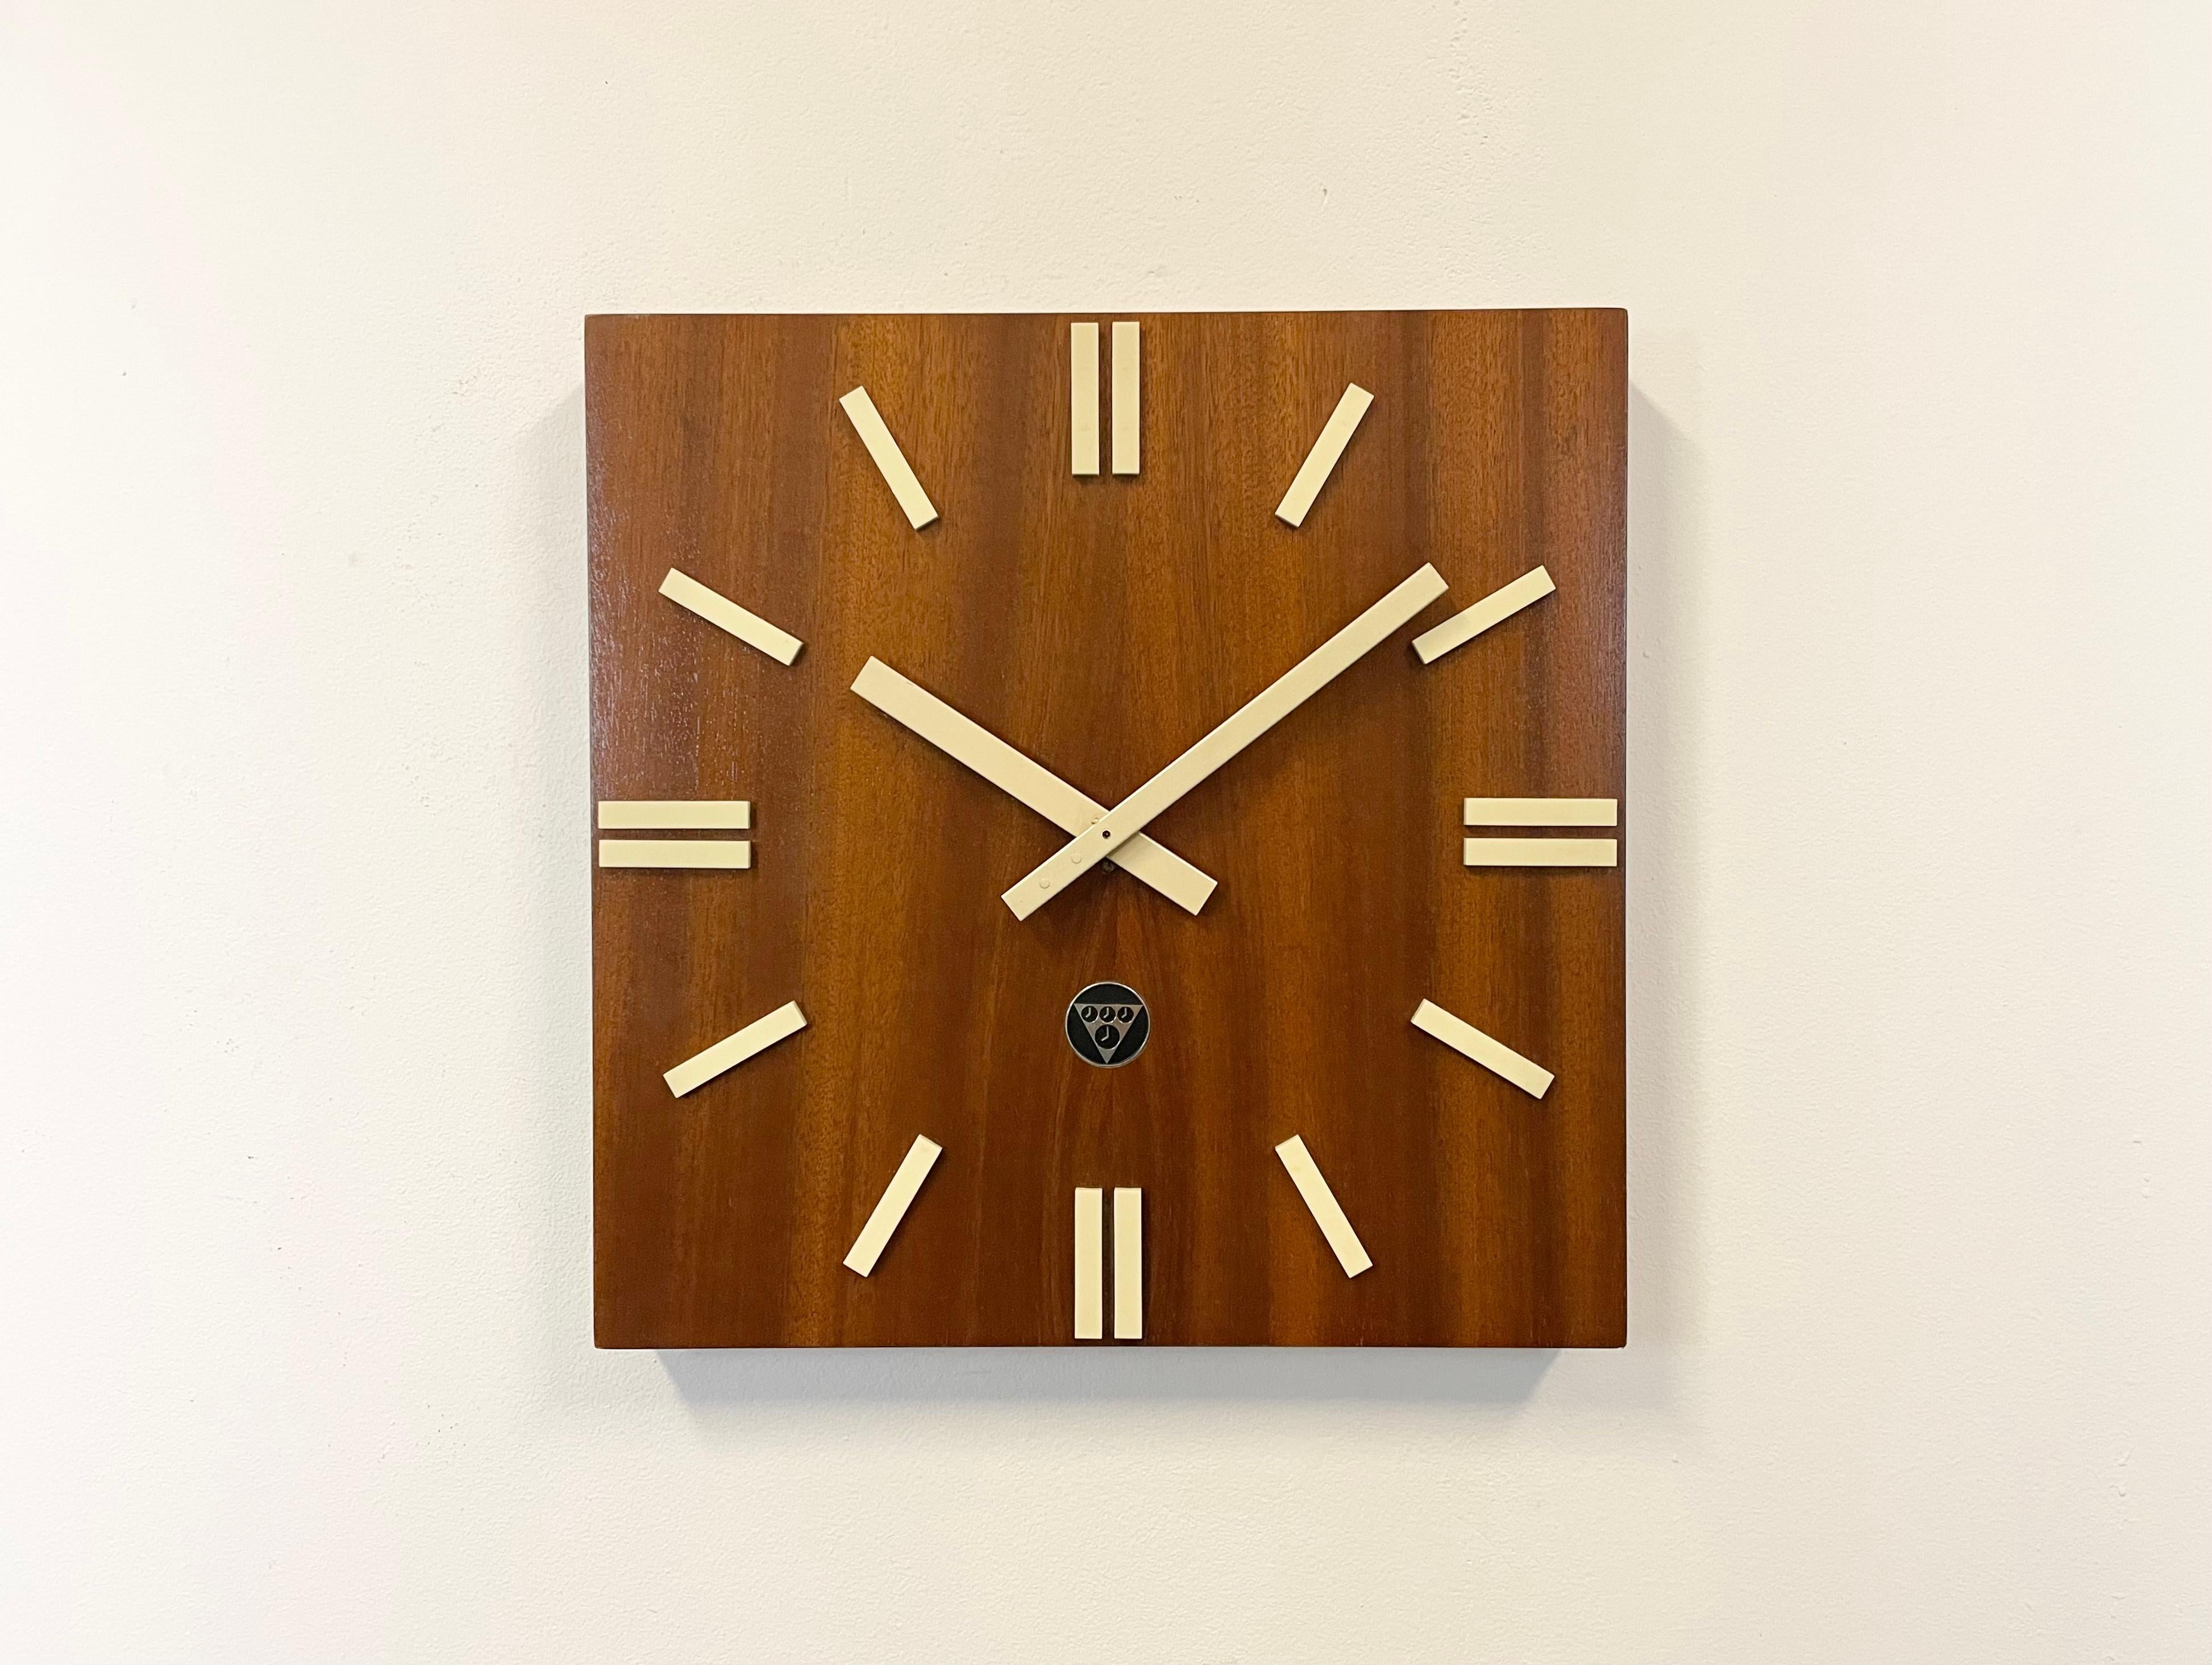 Wall clock, model PPH 410, produced by Pragotron in former Czechoslovakia during the 1980s. It features a brown wooden veneered clockface and plastic 5 minutes marks. The piece has been converted into a battery-powered clockwork and requires only